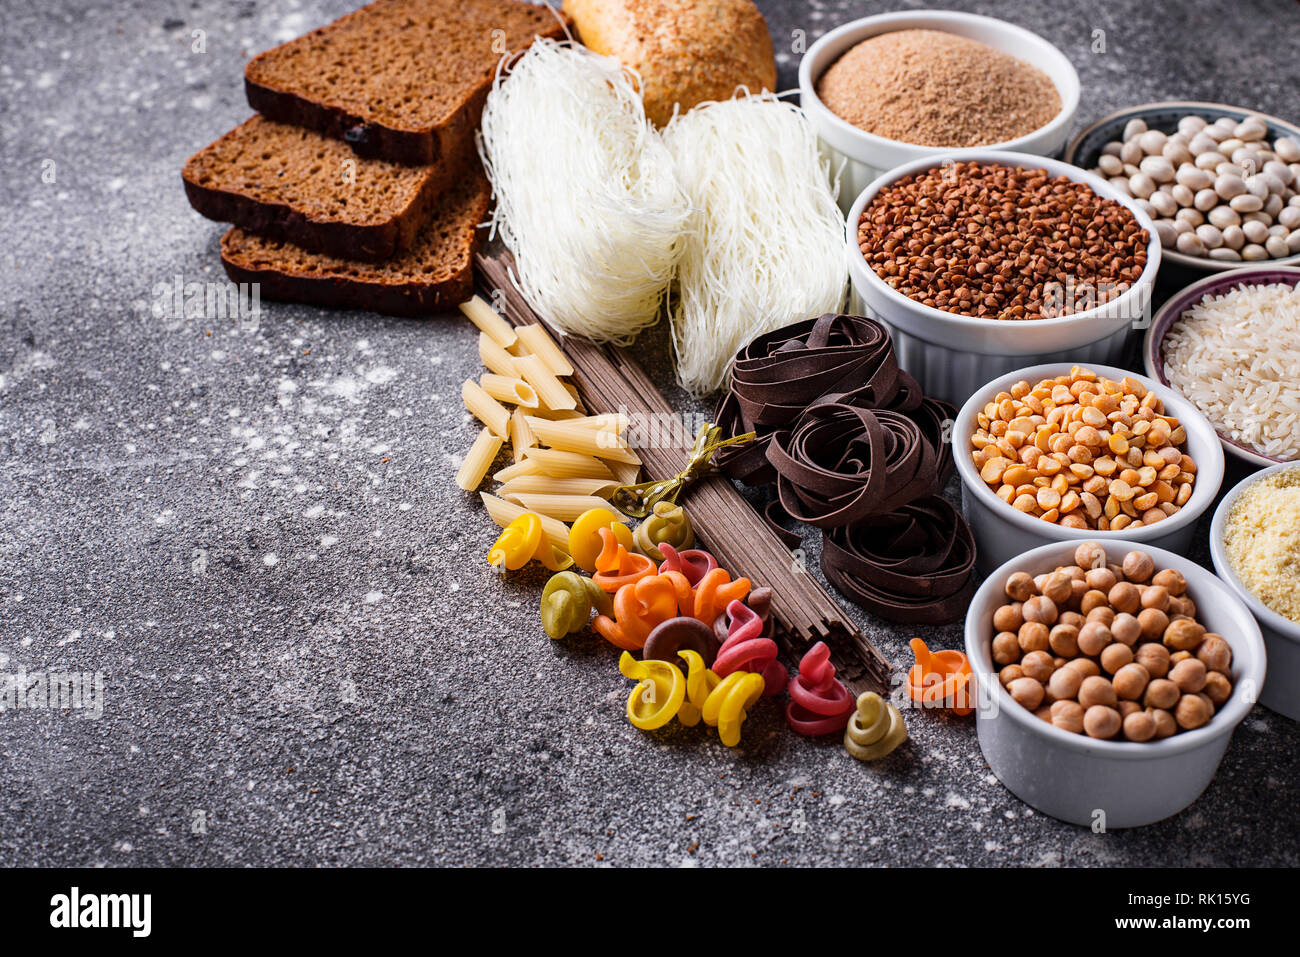 Set of gluten free products Stock Photo